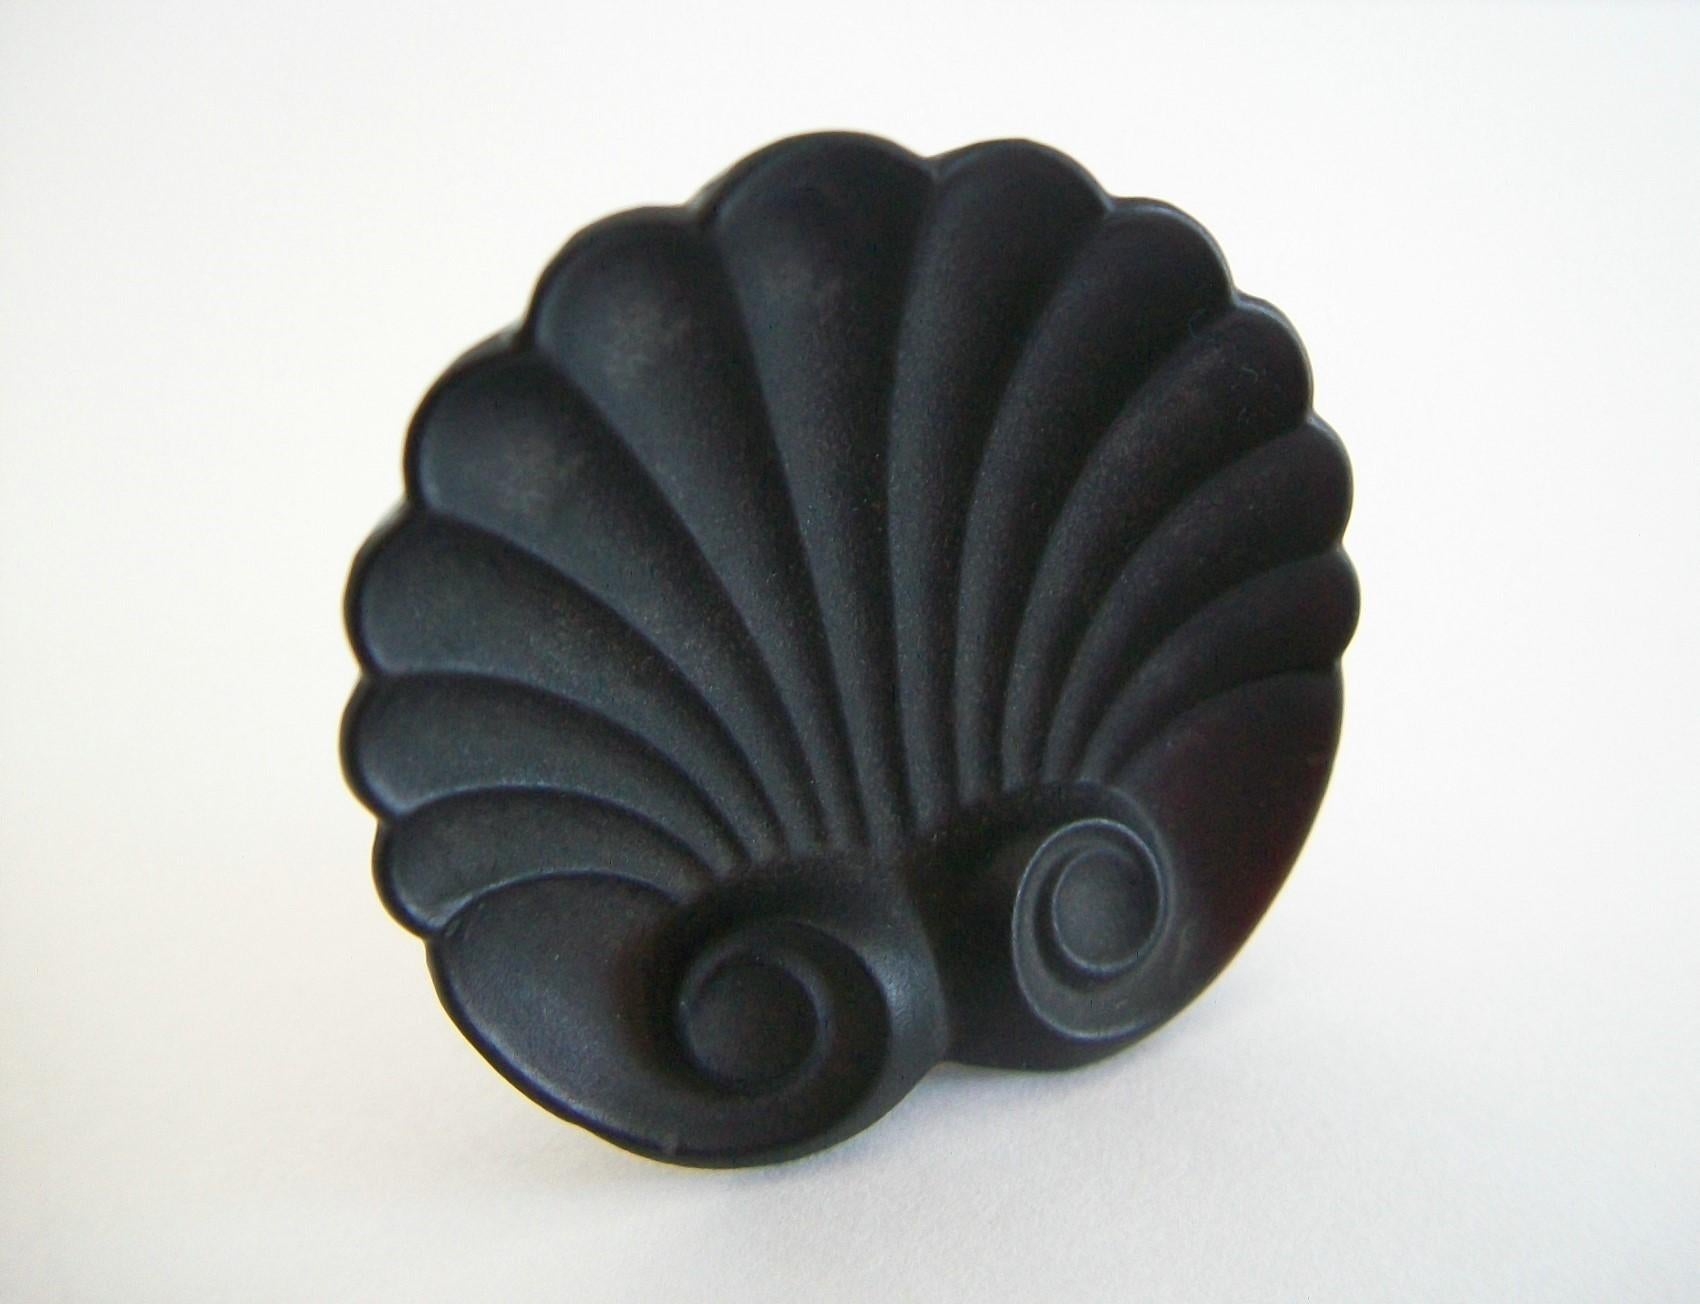 Exceptional Napoleon III Neoclassical French jet (black glass) mourning brooch - the shell symbolizing eternal life - elegant design - matte finish - early original hand made 'c' catch and tube hinge and long pin in base metal - unsigned - France -